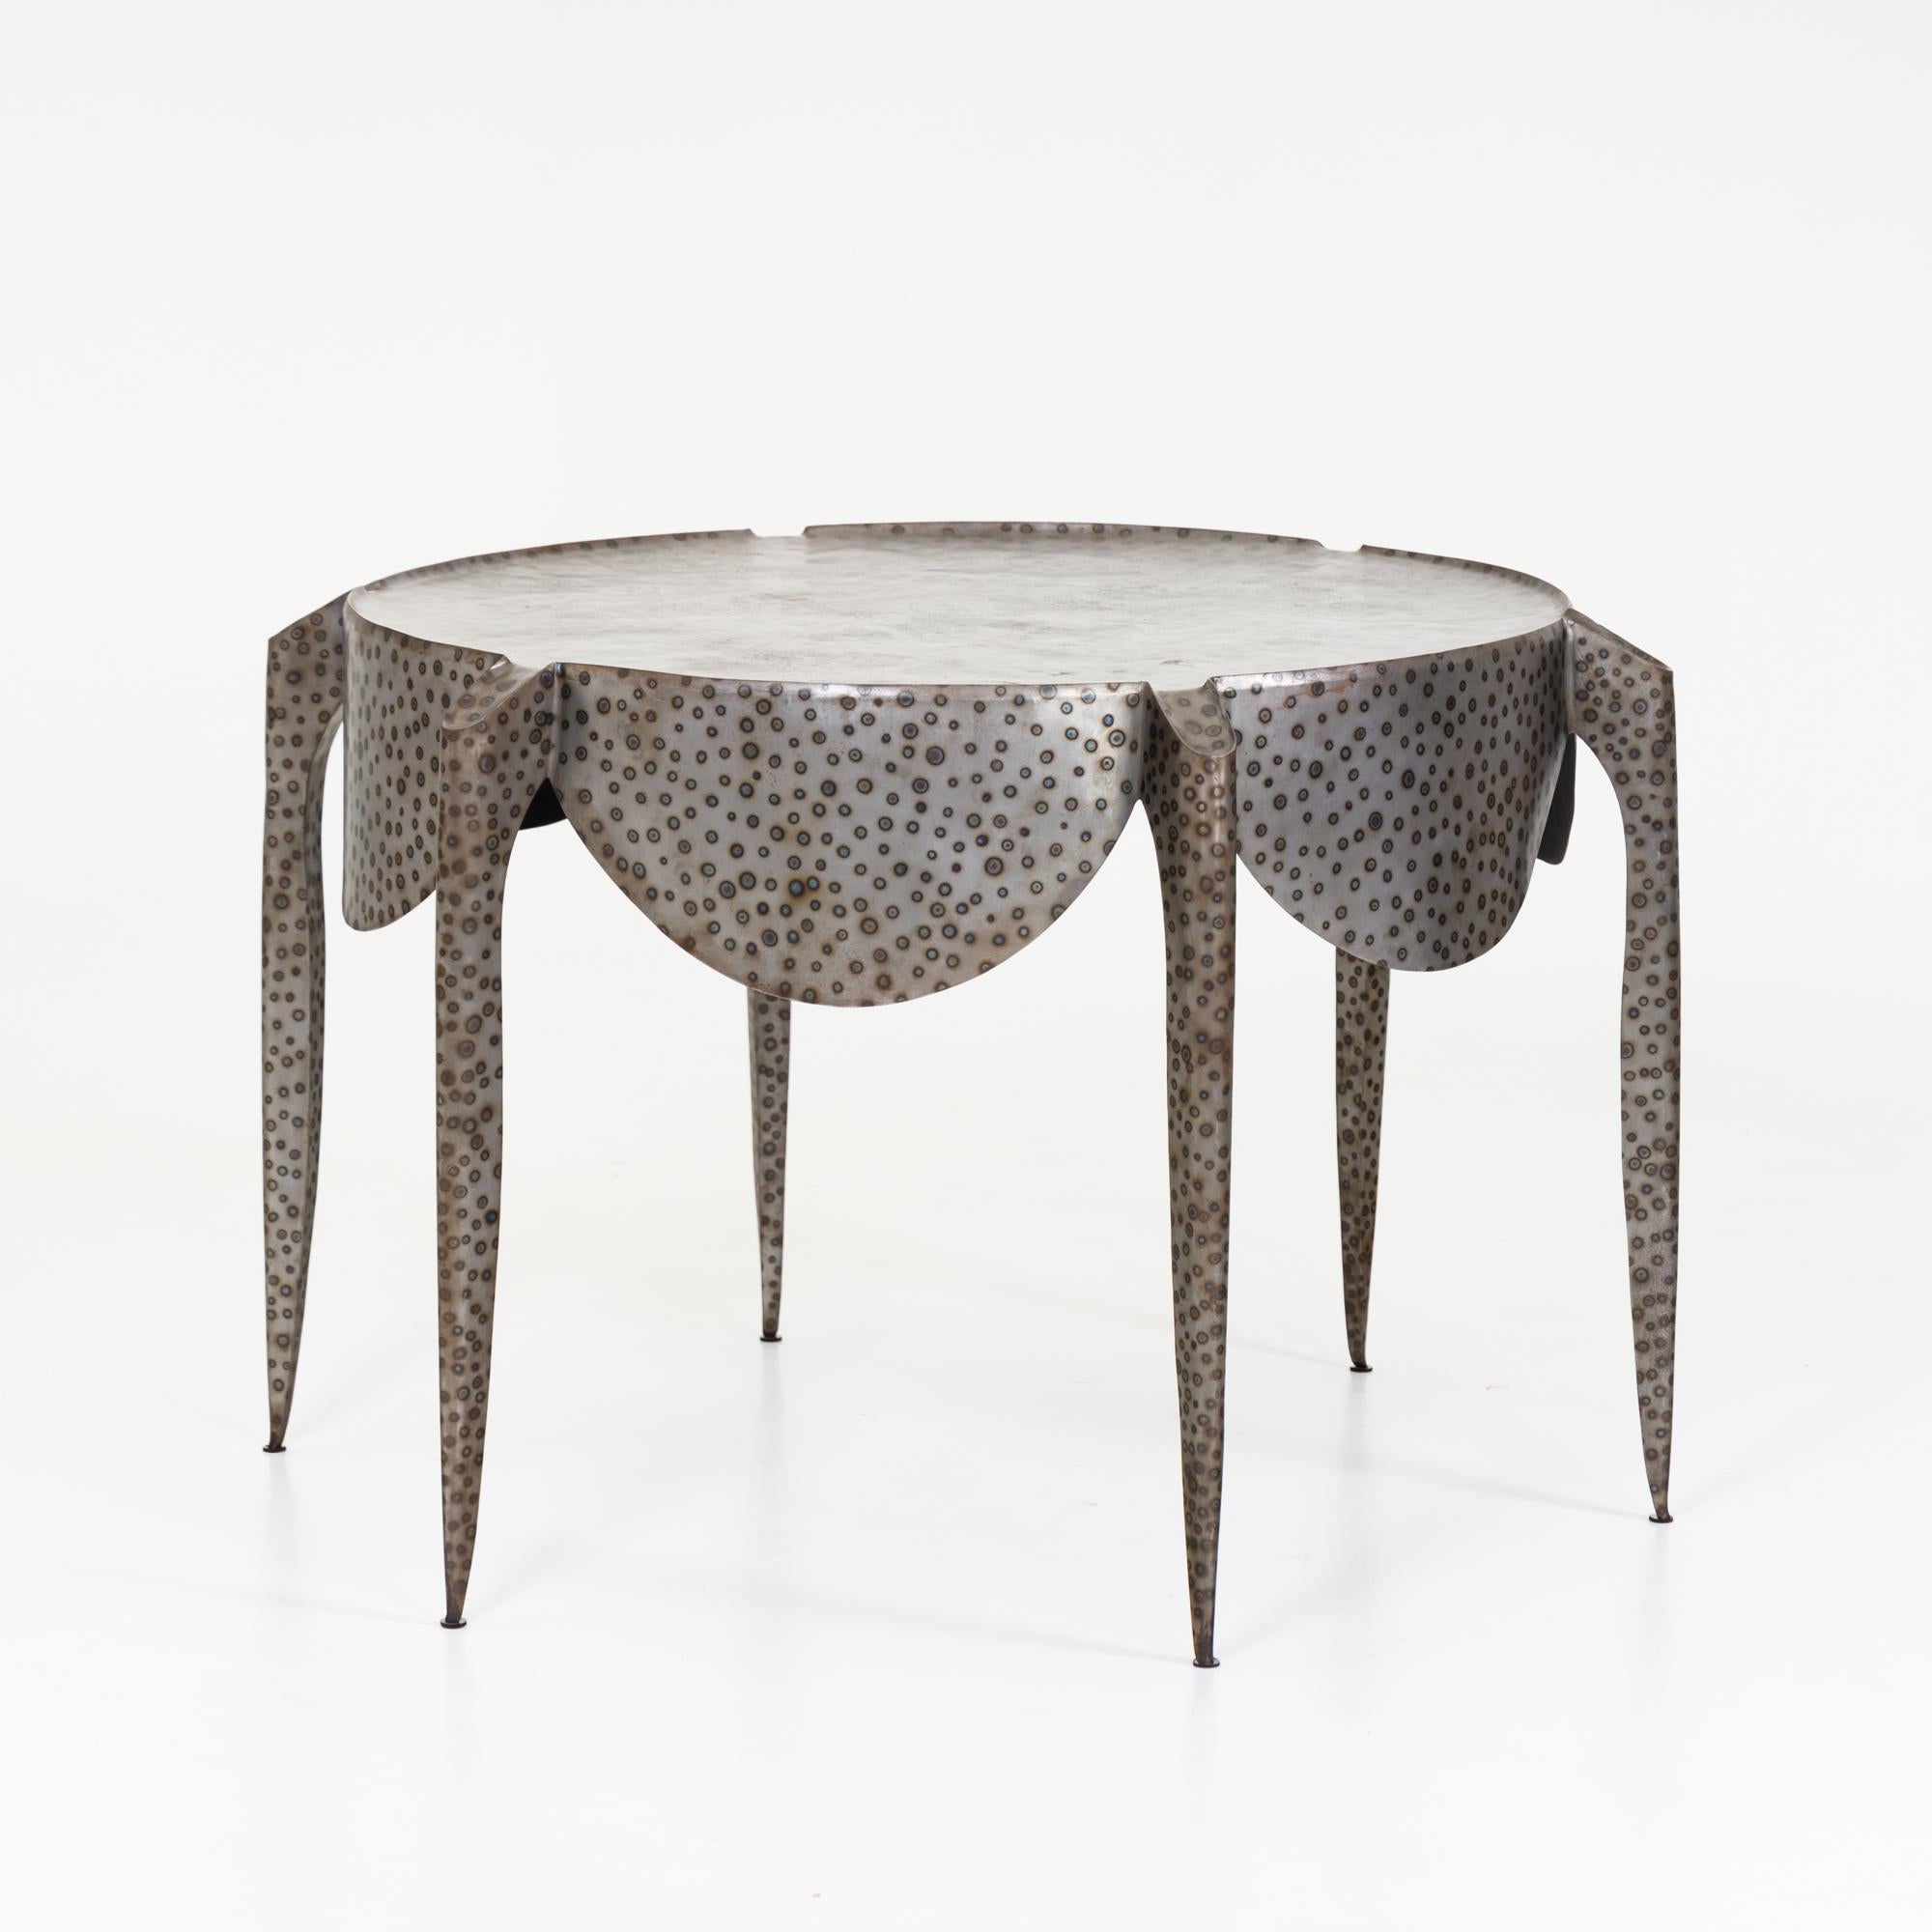 Late 20th Century André Dubreuil (*1951), Paris Table, France, designed in 1988  For Sale